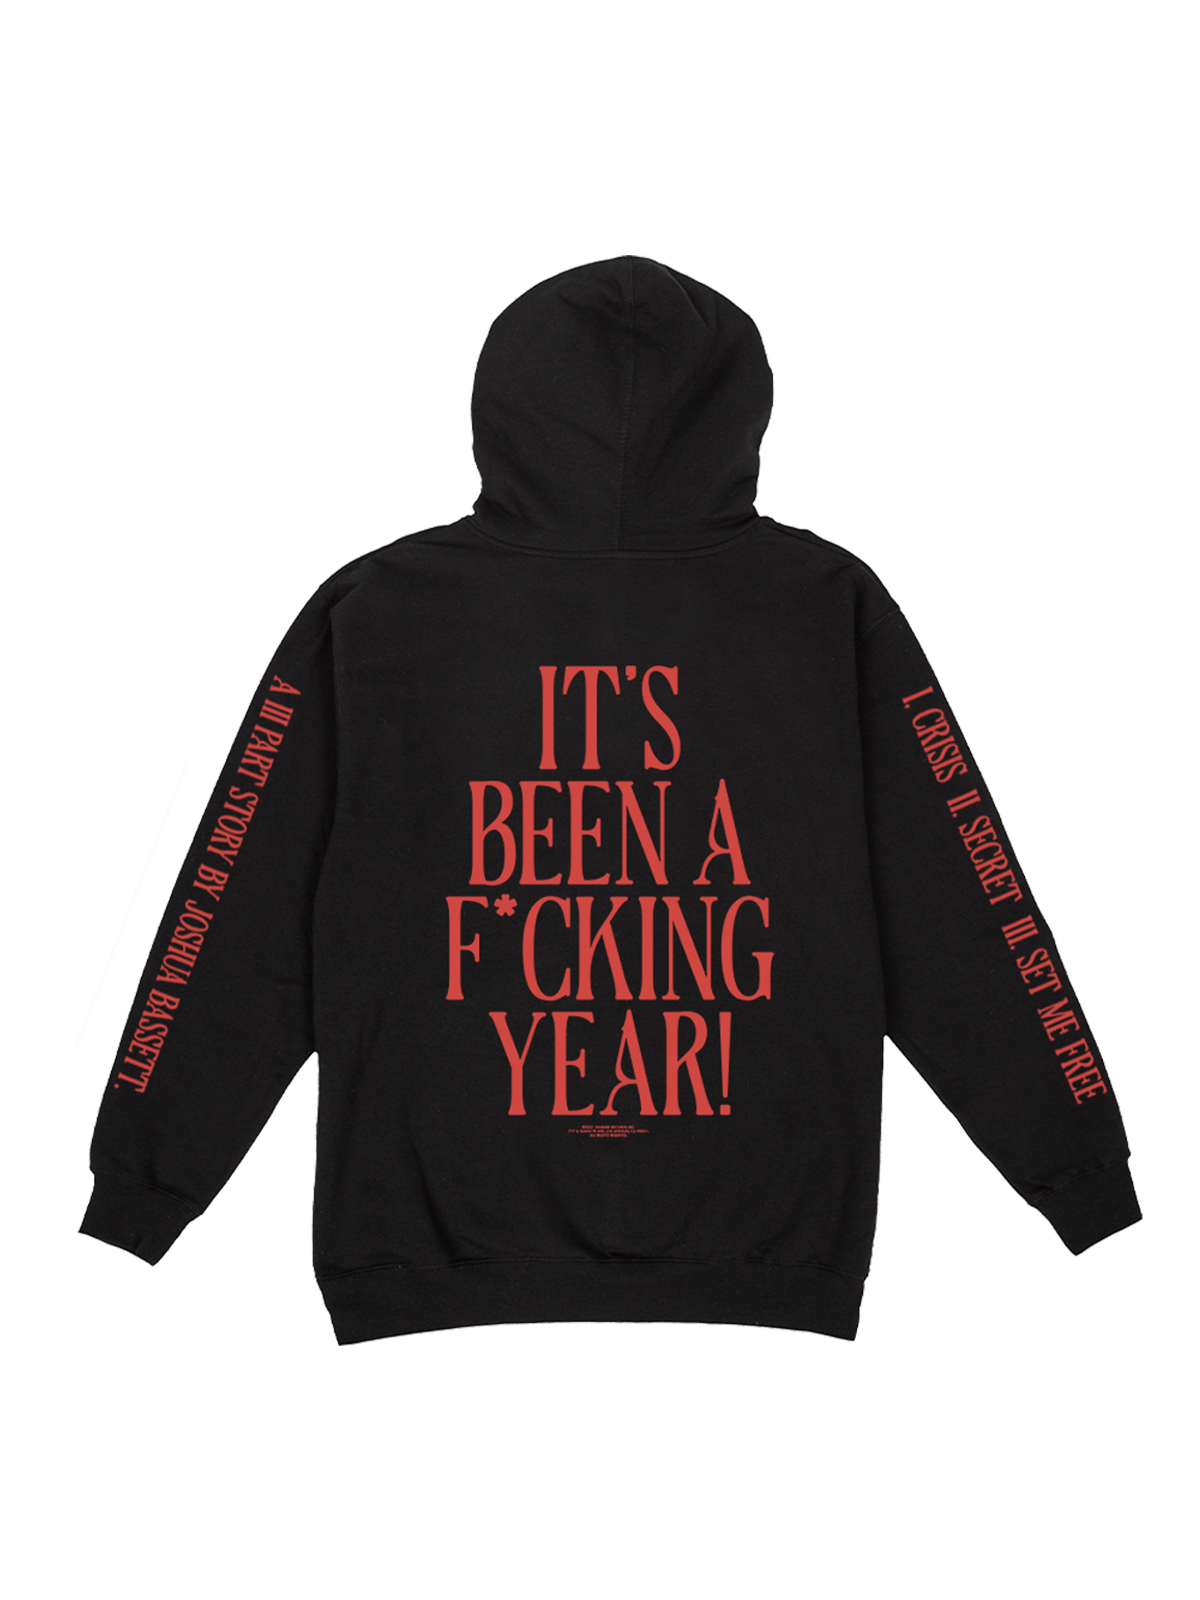 It's been a f*cking year black and red hoodie back Joshua Bassett